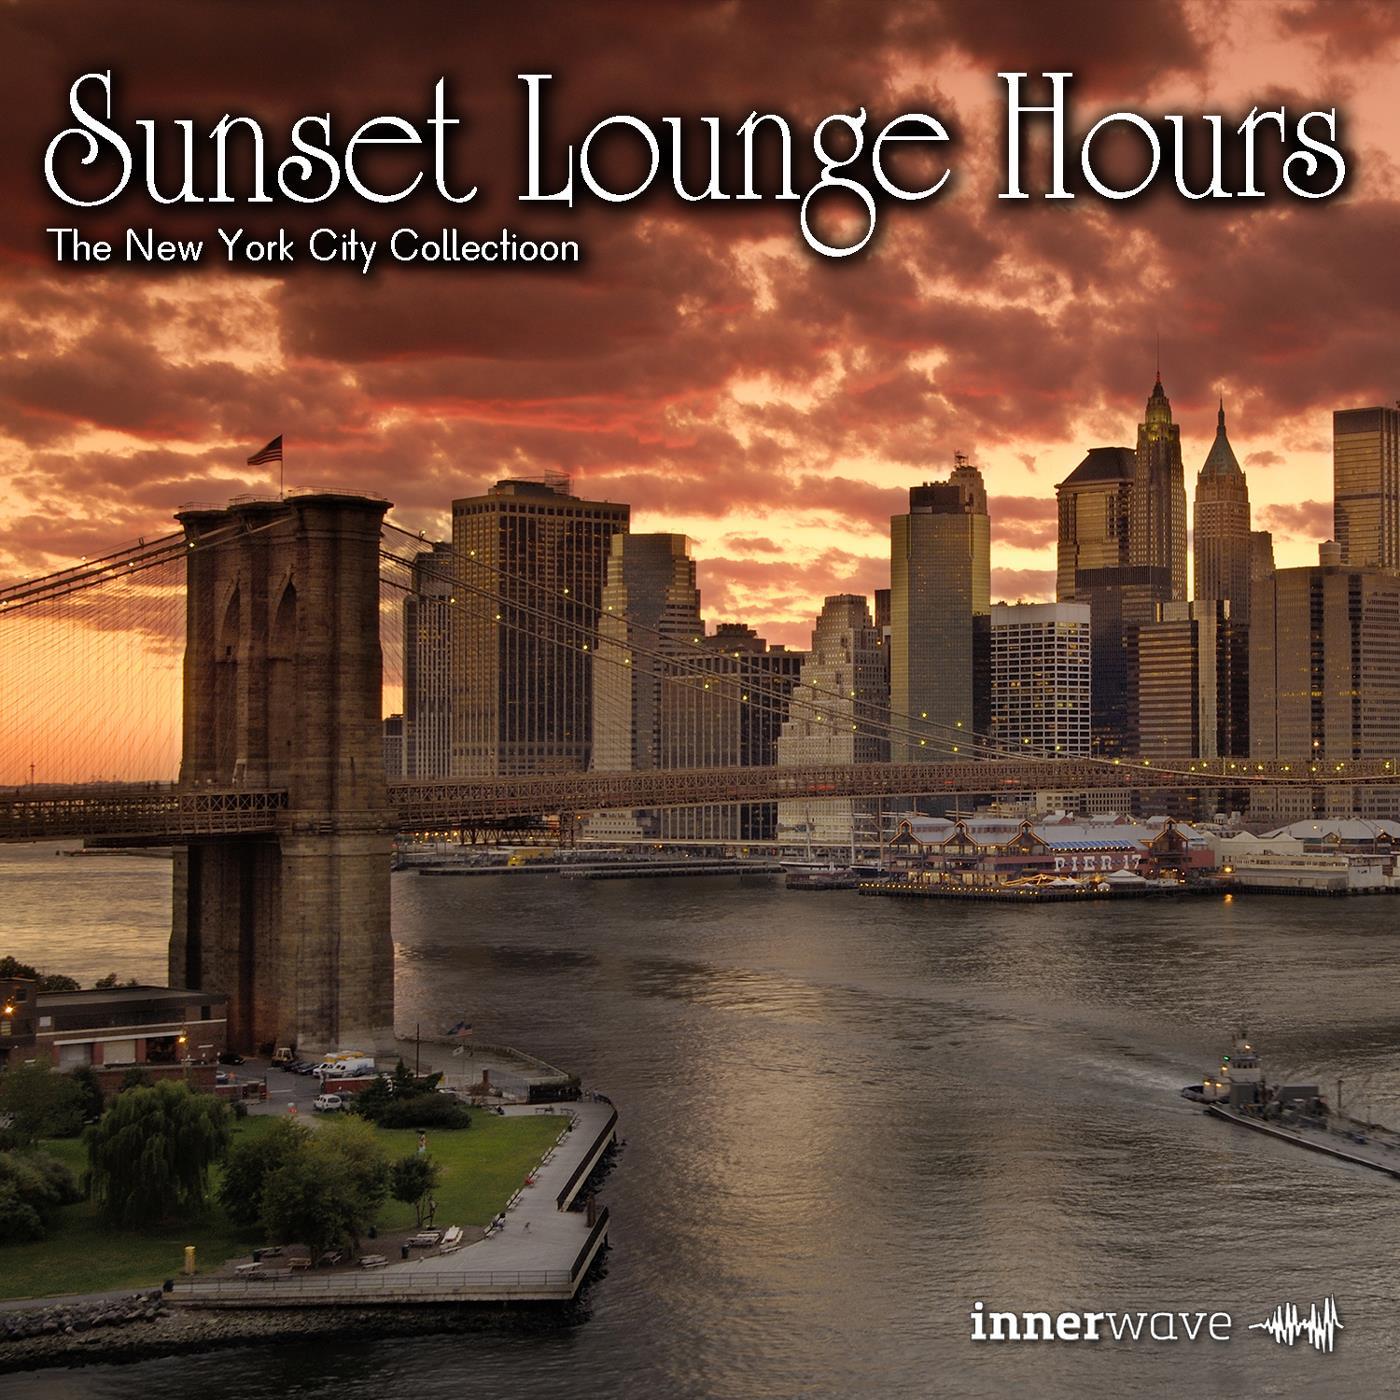 Sunset Lounge Hours - The New York City Collection